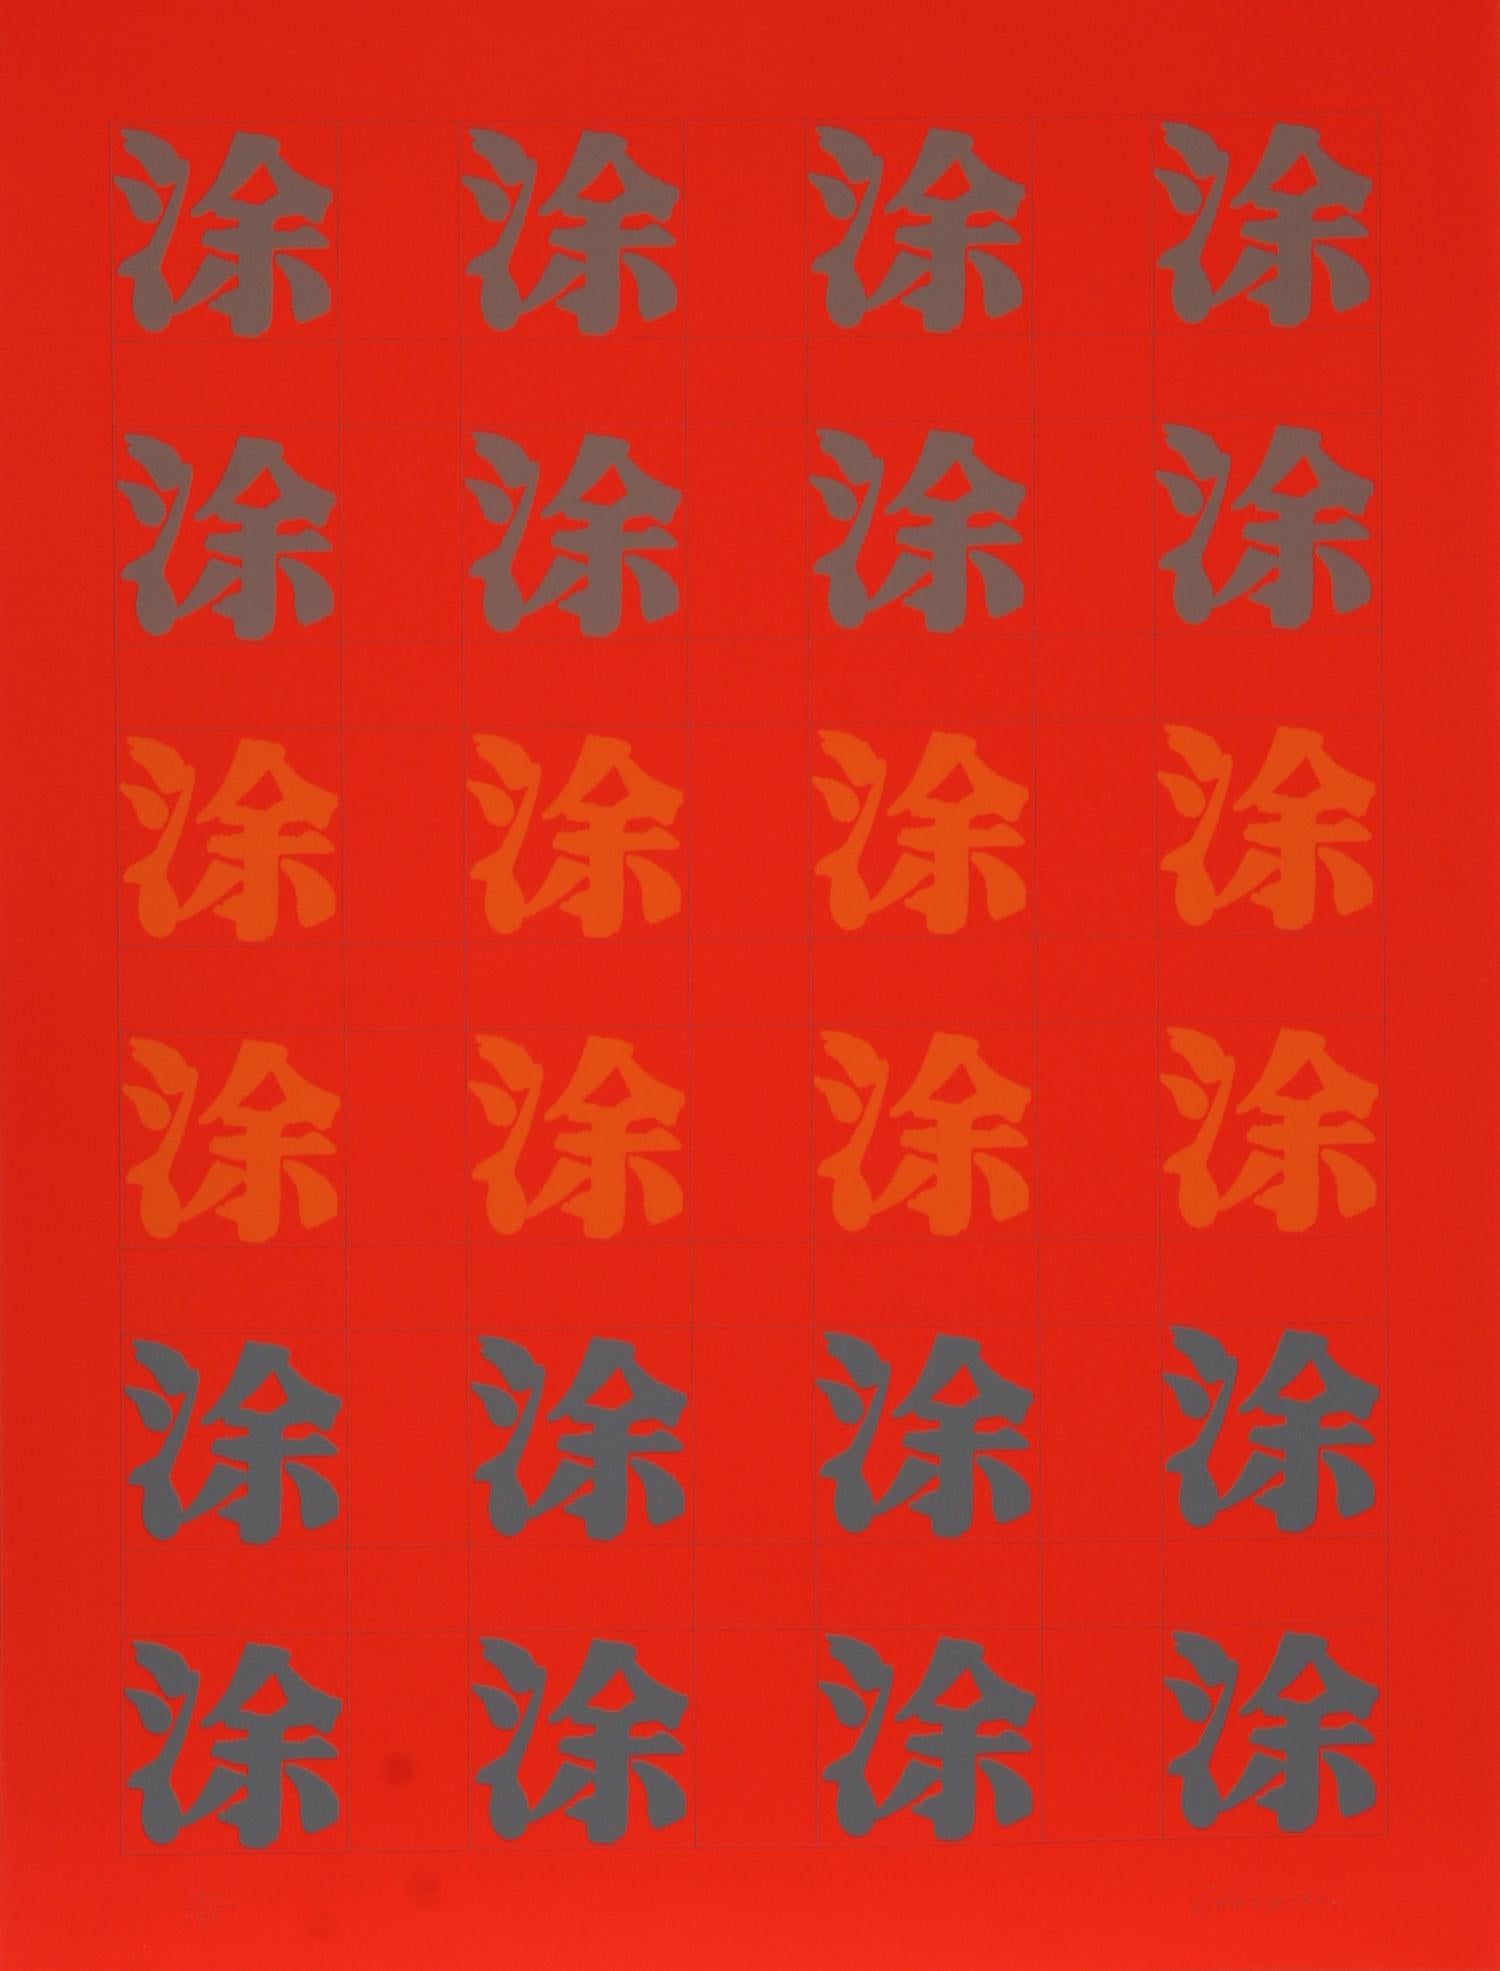 Artist: Chryssa, Greek (1933 - 2013)
Title: Chinatown Portfolio
Year: circa 1978
Medium: 12 Screenprints, each signed and numbered in pencil
Edition: 150 
Size: 40 in. x 30.5 in. (101.6 cm x 77.47 cm) [each sheet)